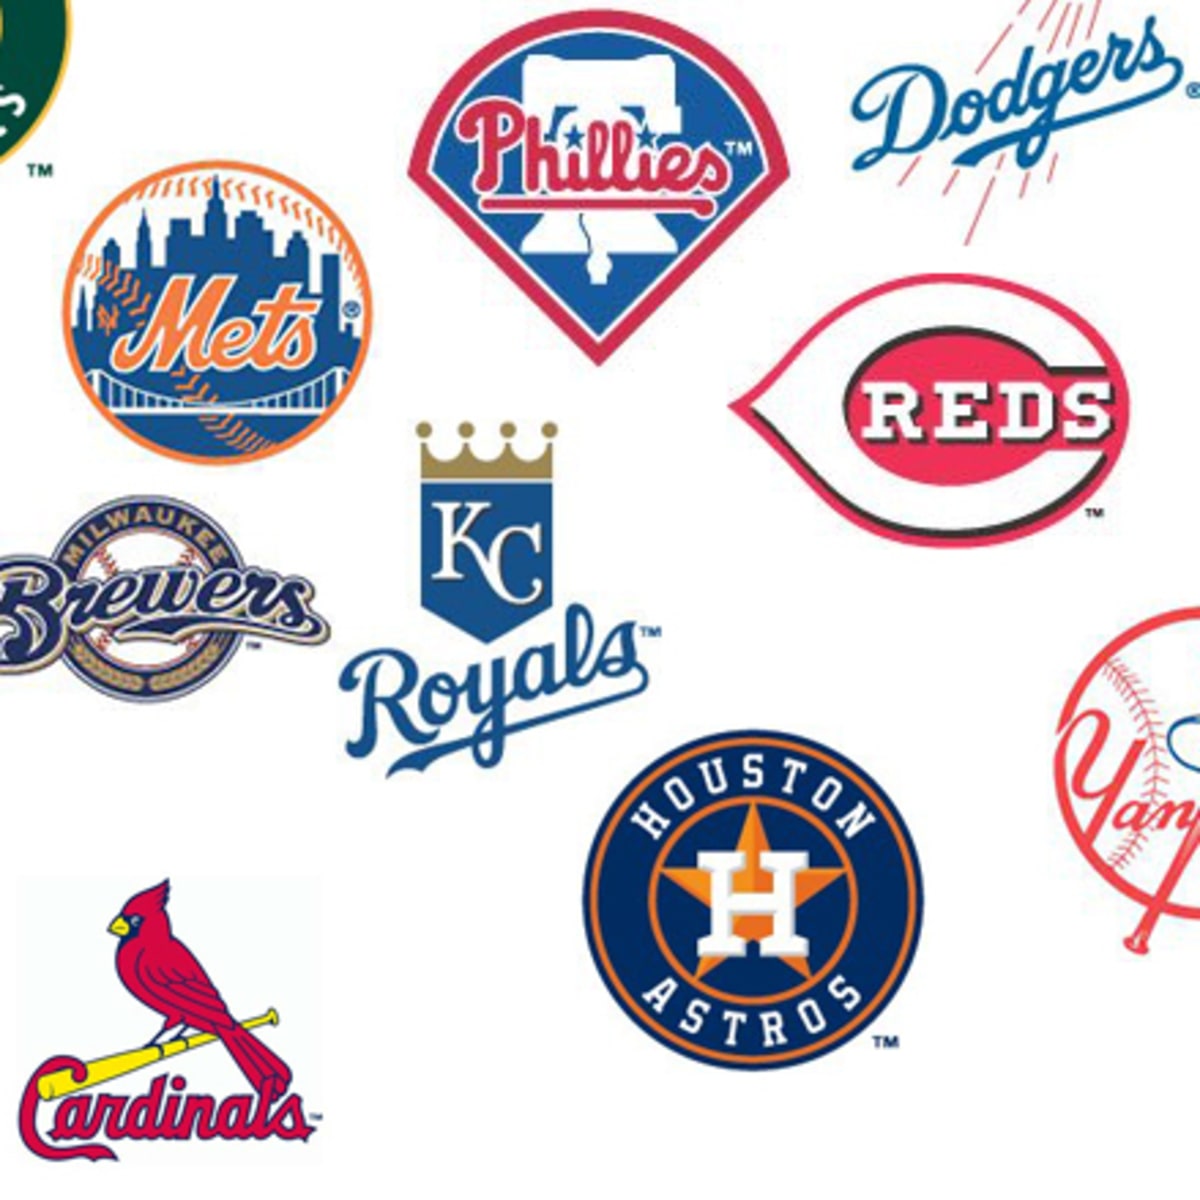 MLB: The Best and Worst Uniforms/Logos